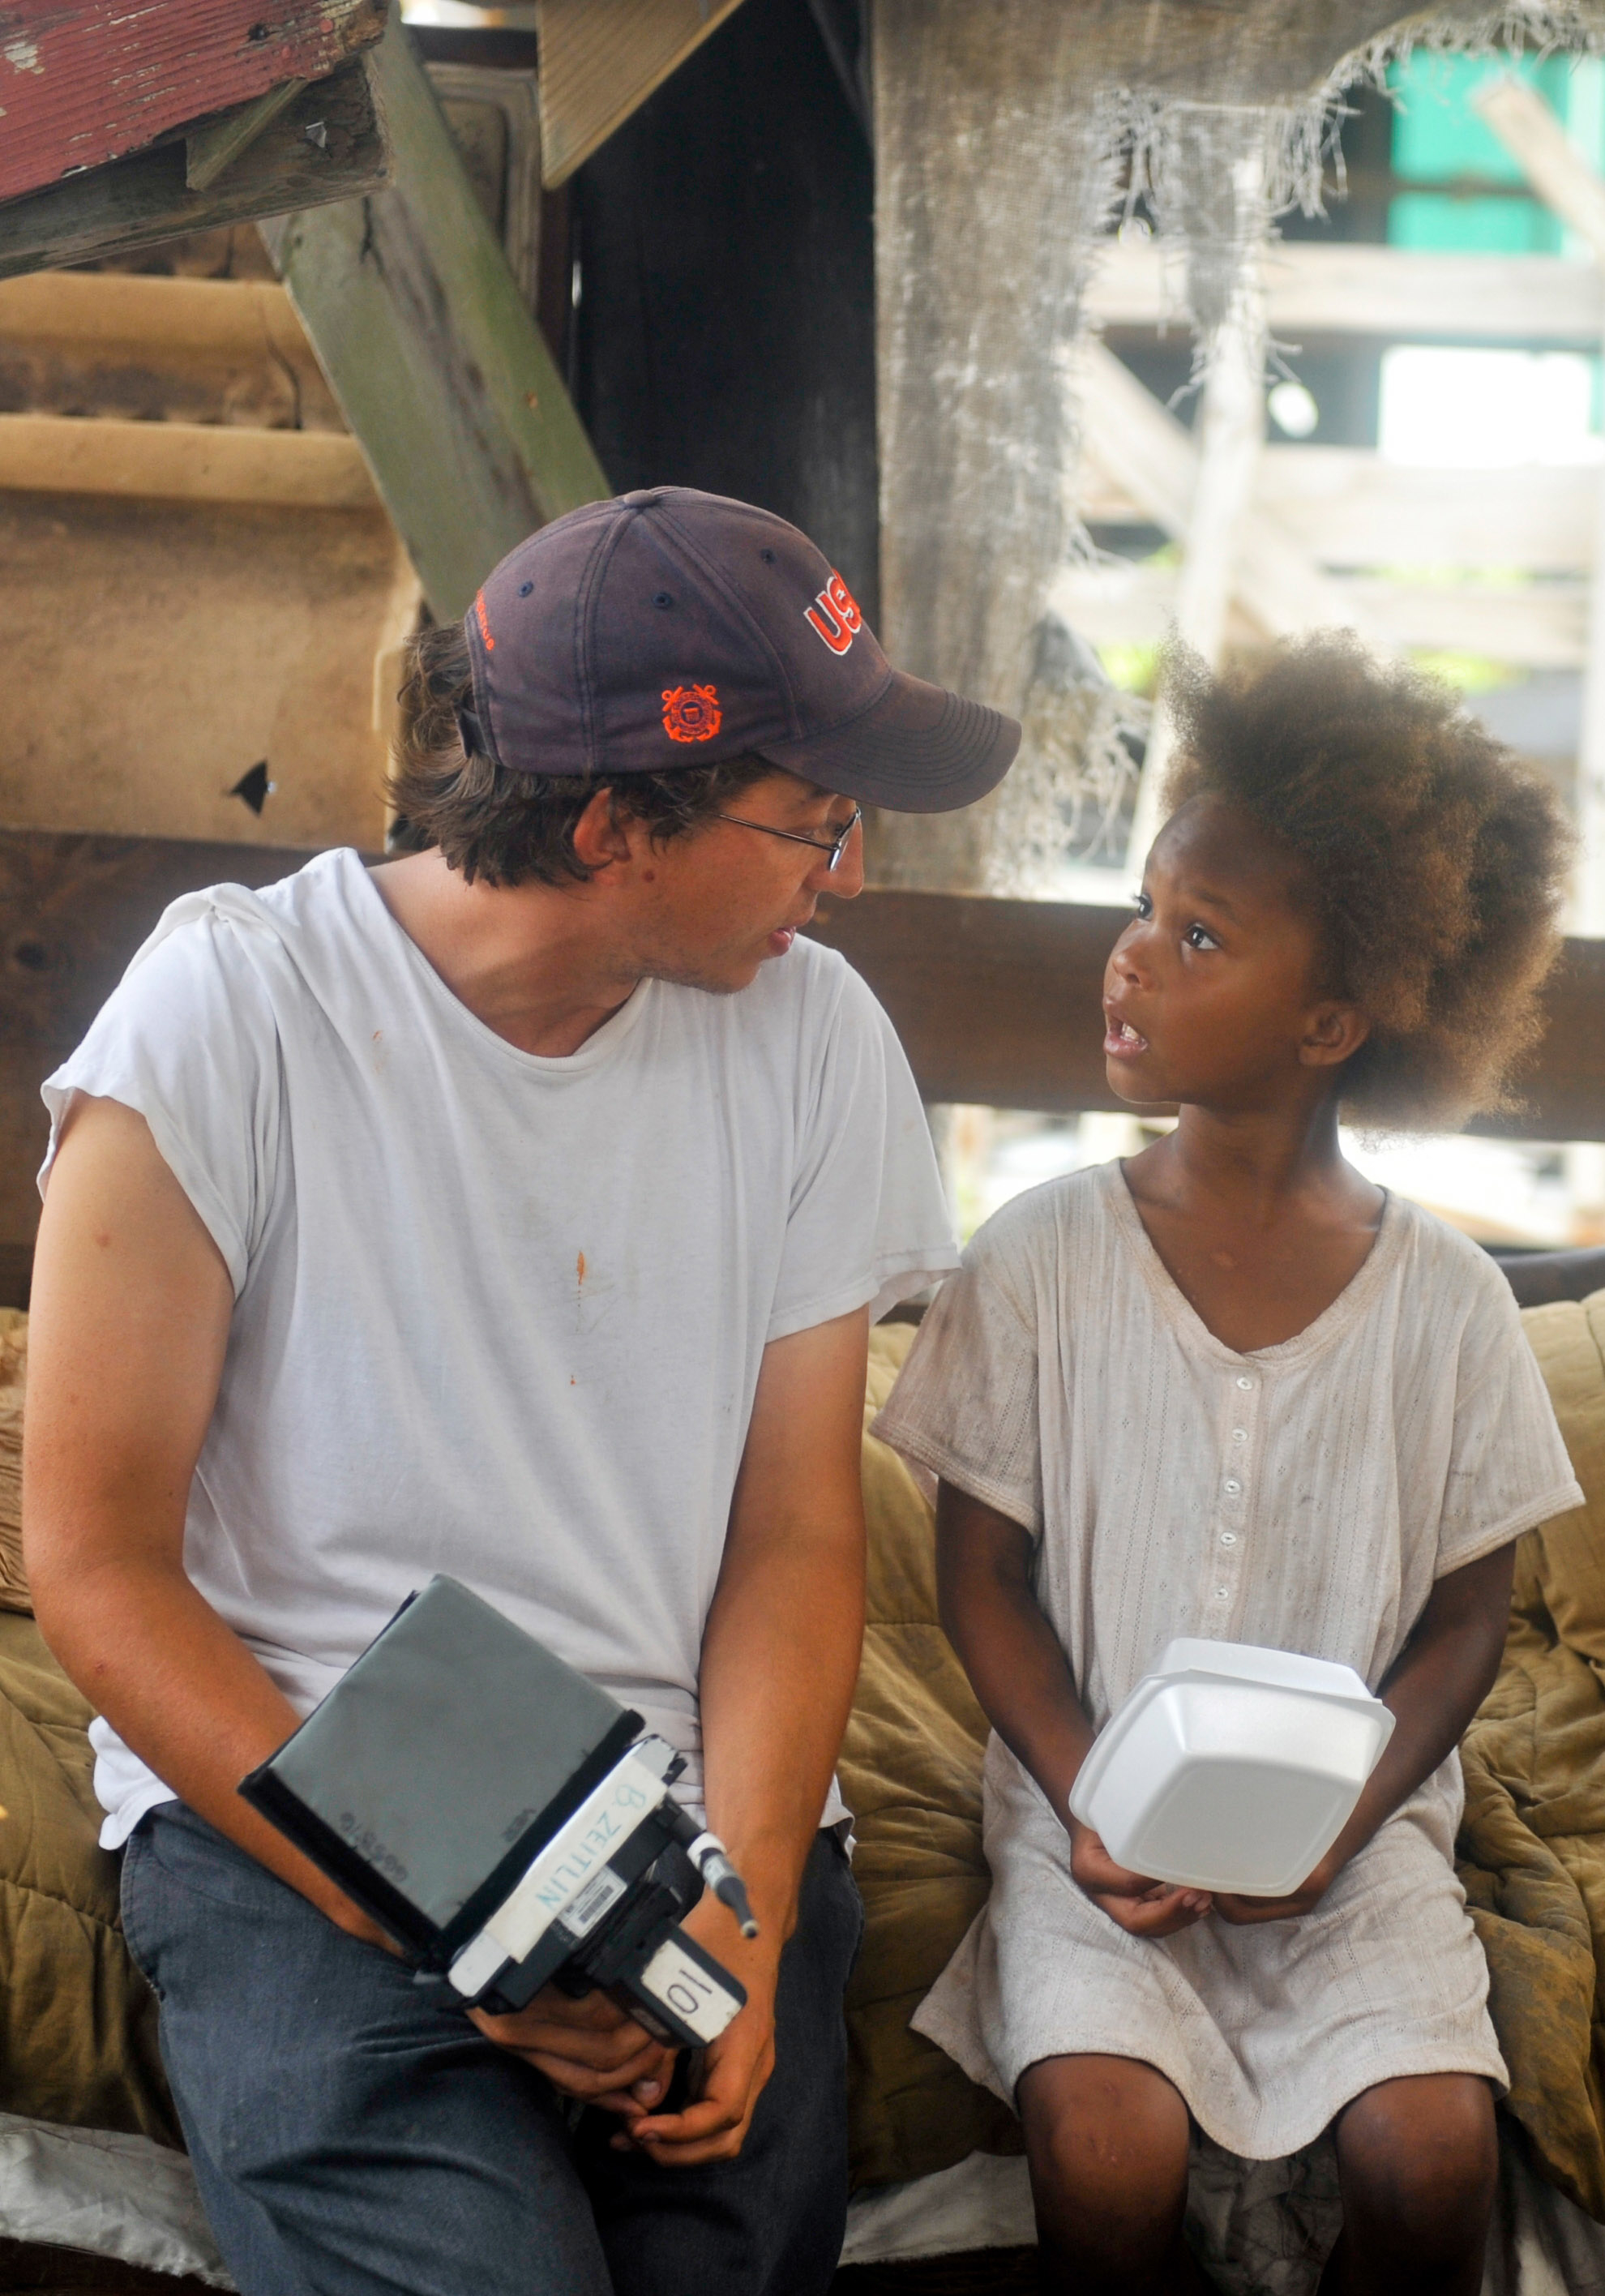 Director Benh Zeitlin sitting and talking to Quvenzhané Wallis on set